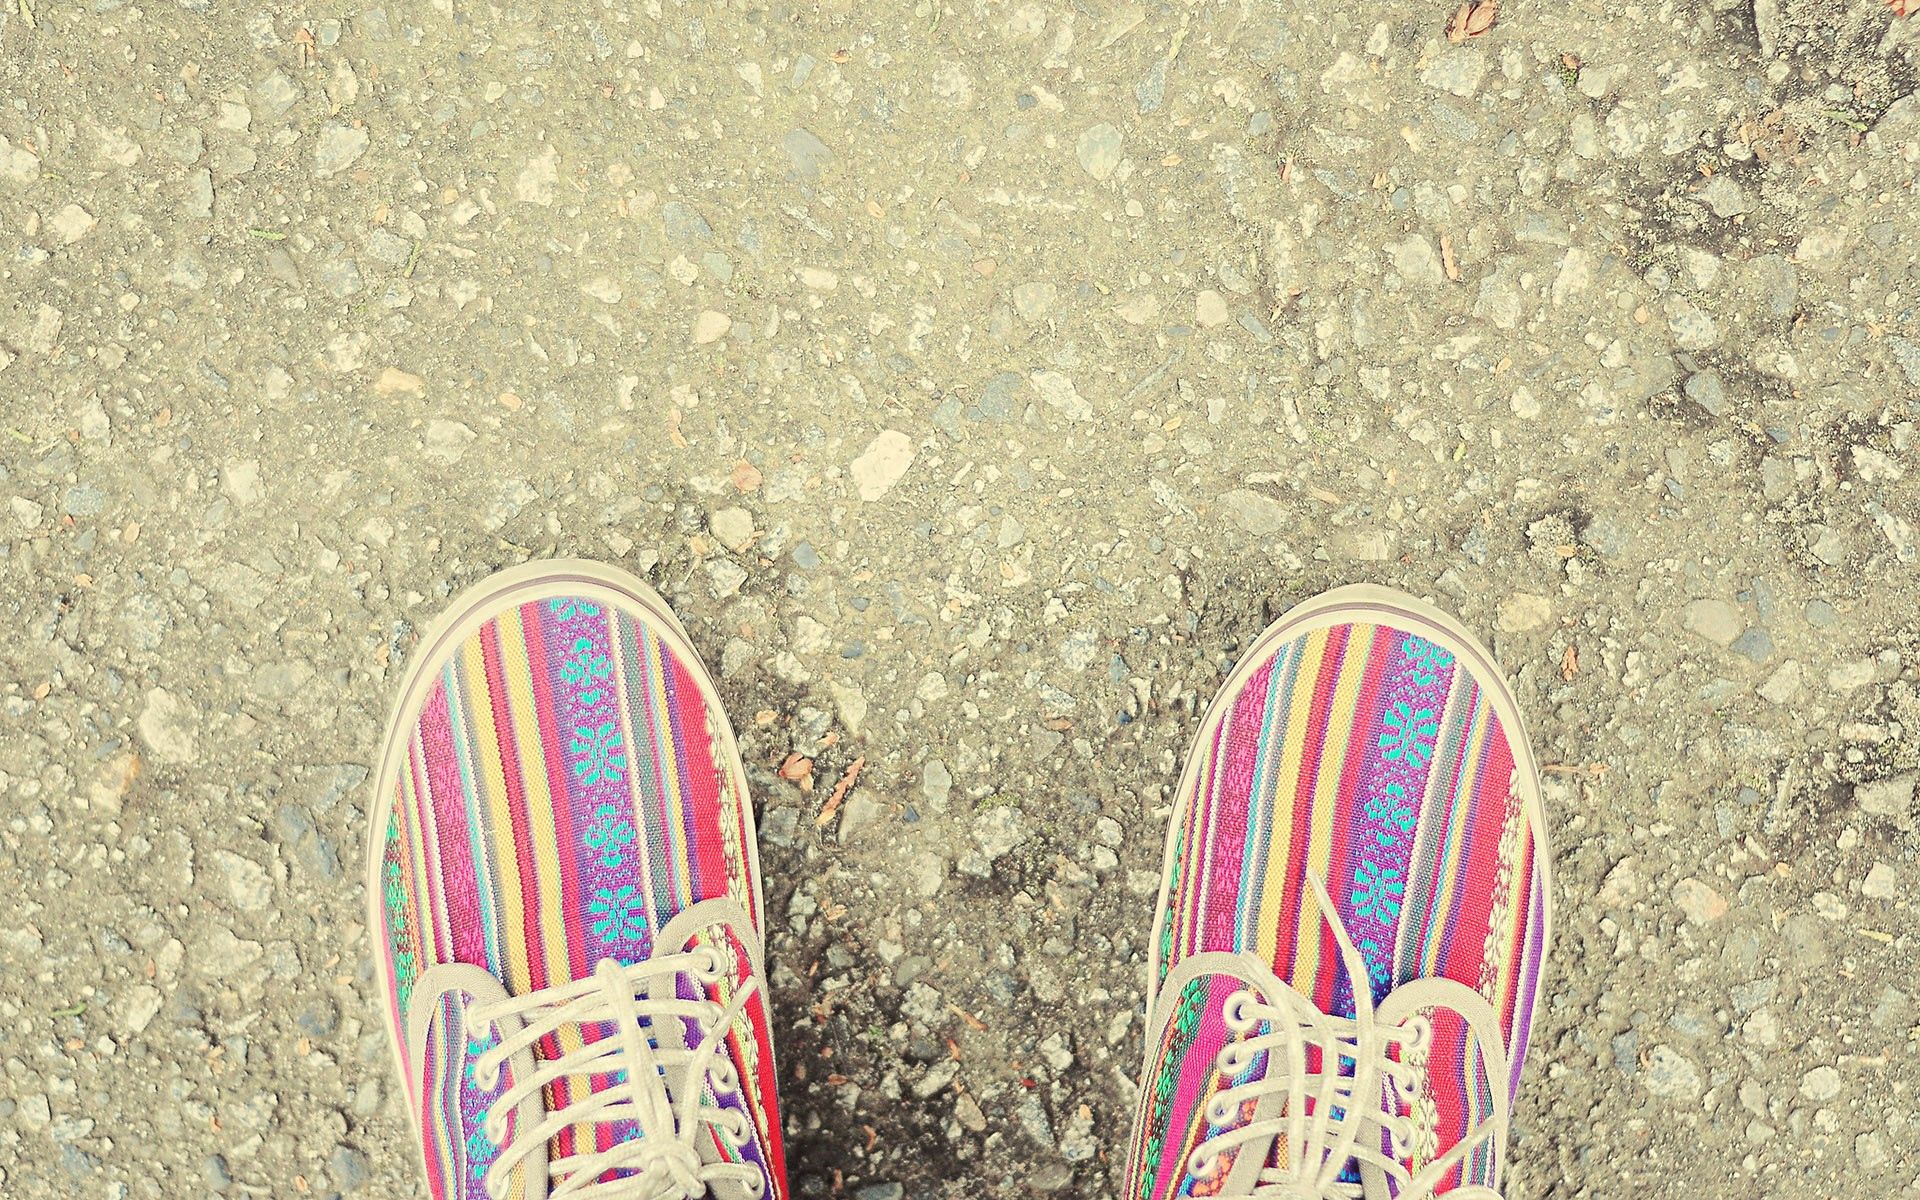 Free HD miscellanea, miscellaneous, sneakers, striped, style, shoes, footwear, laces, shoelaces